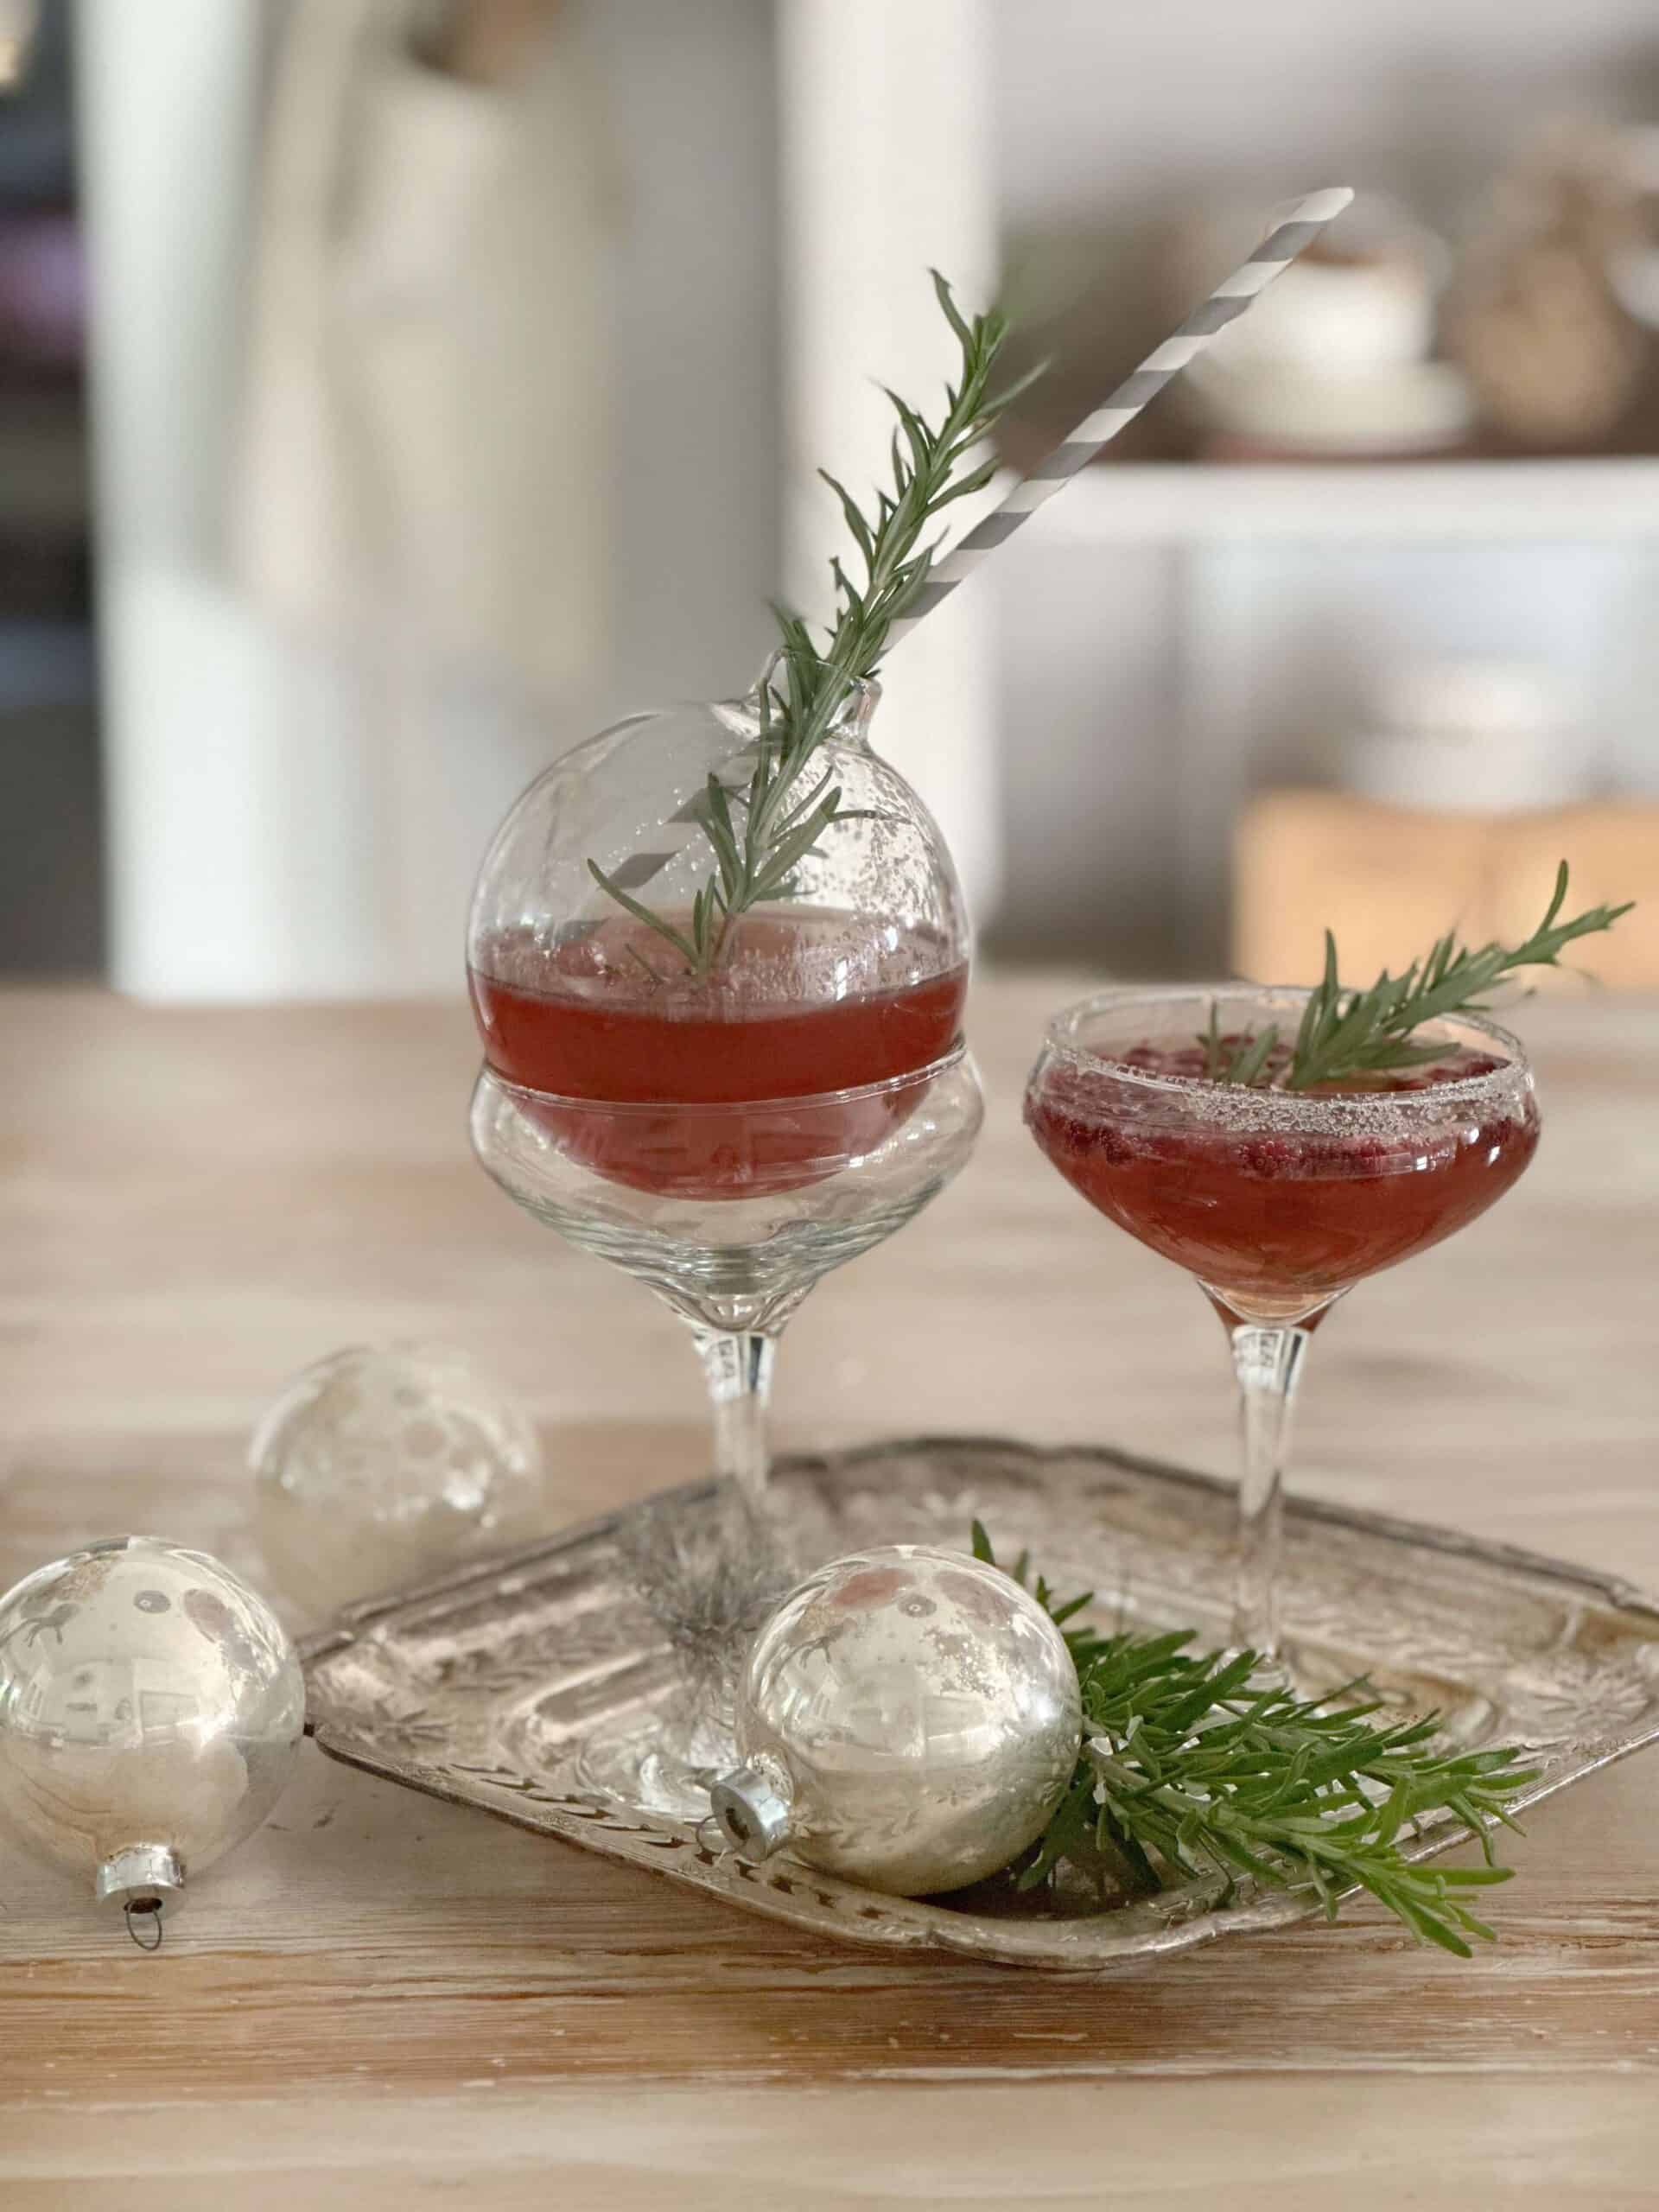 Use This Herb to Put a Christmas Tree In Your Holiday Party Drink